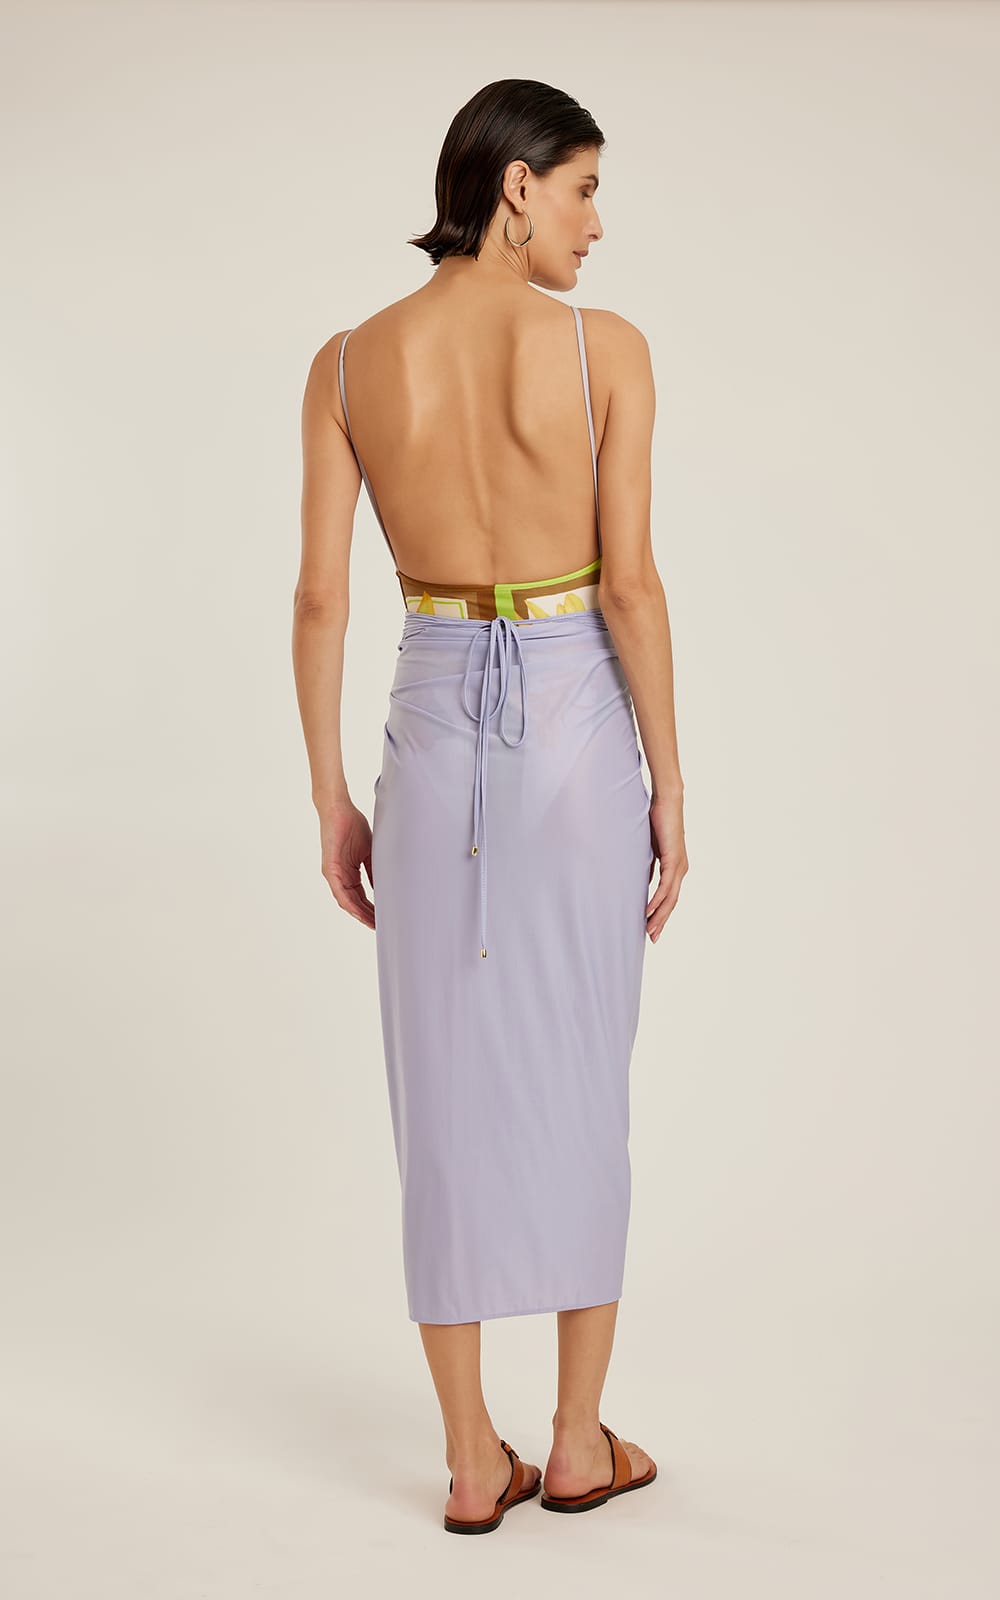 Lenny Niemeyer Knot Touch Sarong in Hortensia -Wear Multiple Ways